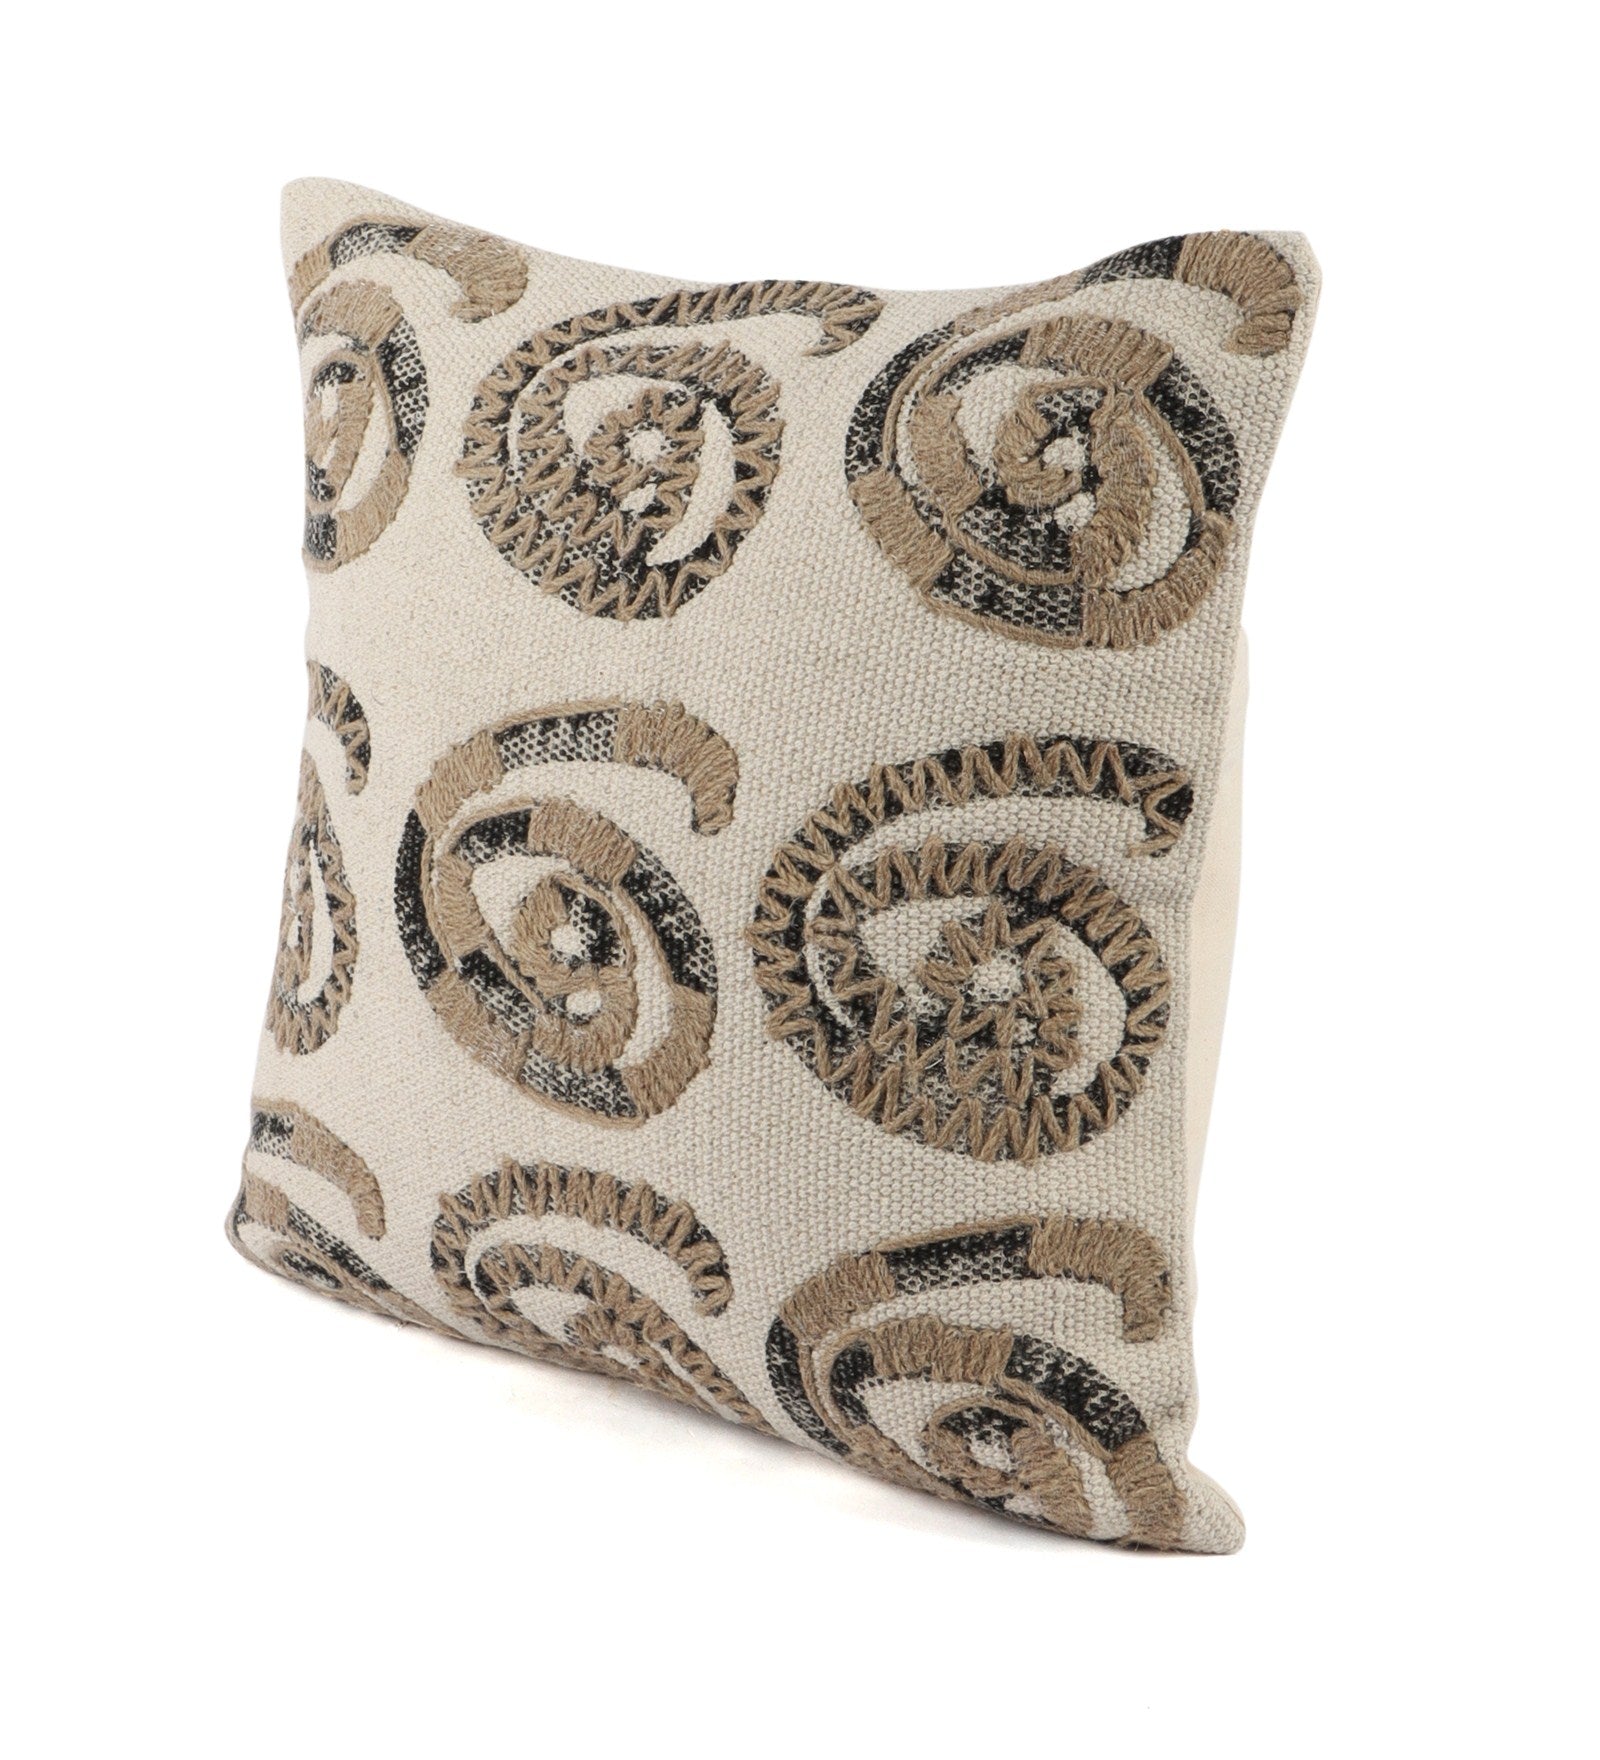 Embroidered Contemporary Cushion Cover (Beige Commas)